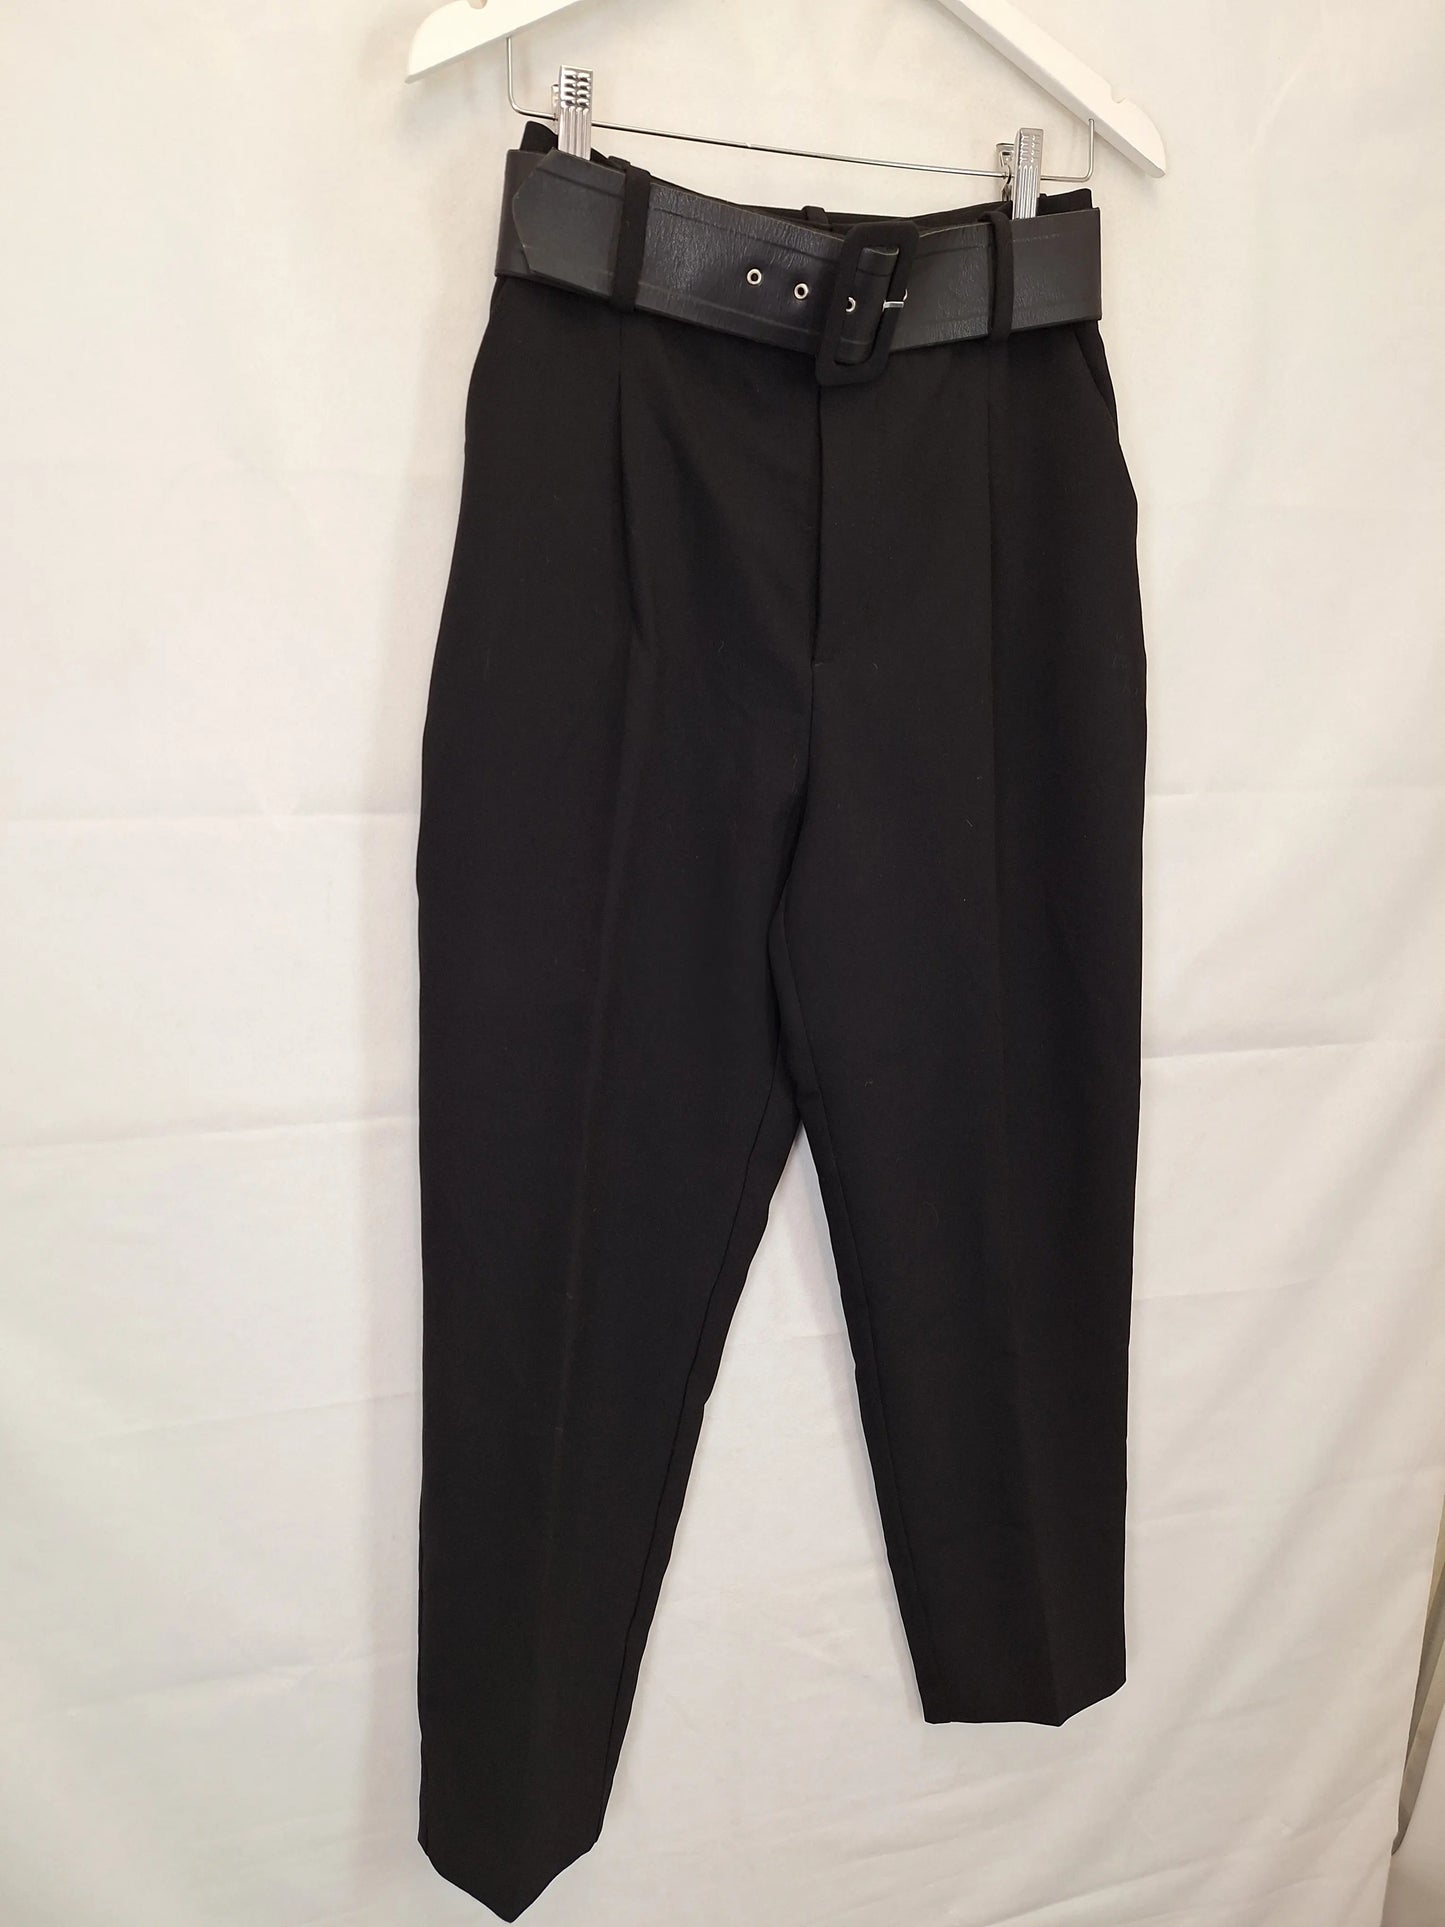 Zara Belted High Waisted Pants Size M – SwapUp